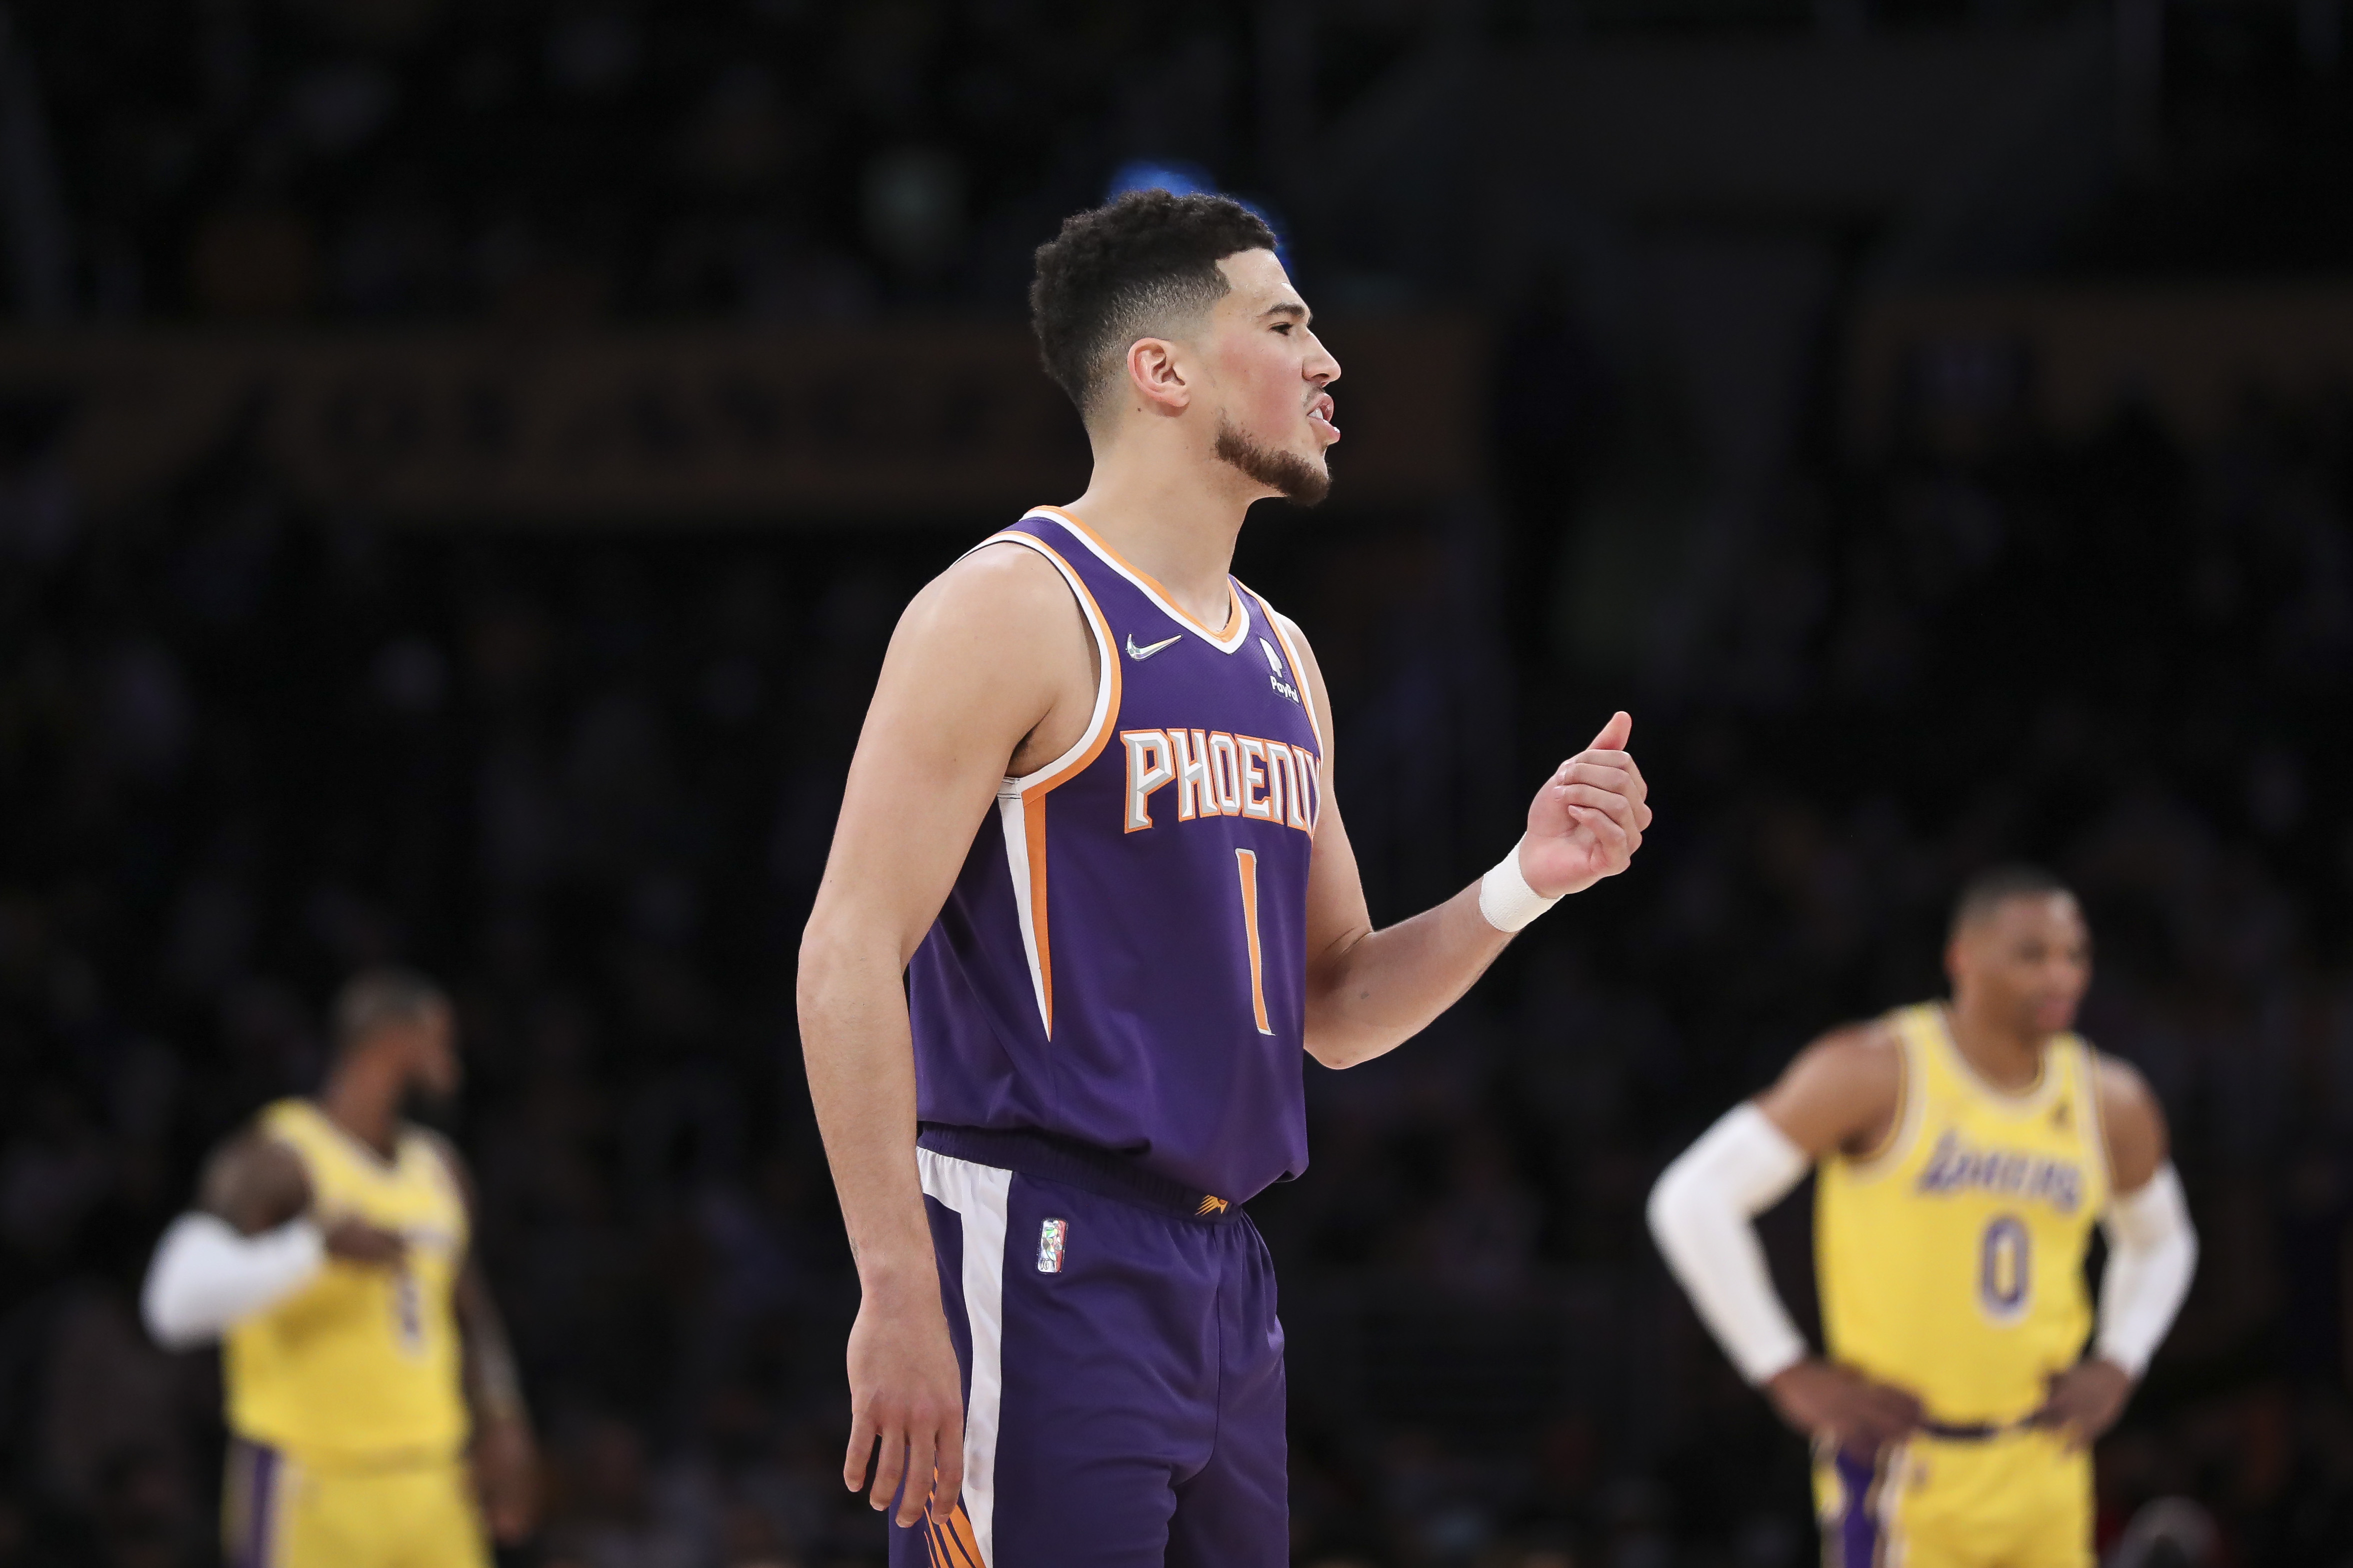 Phoenix Suns star Devin Booker reacts during a game against the Los Angeles Lakers